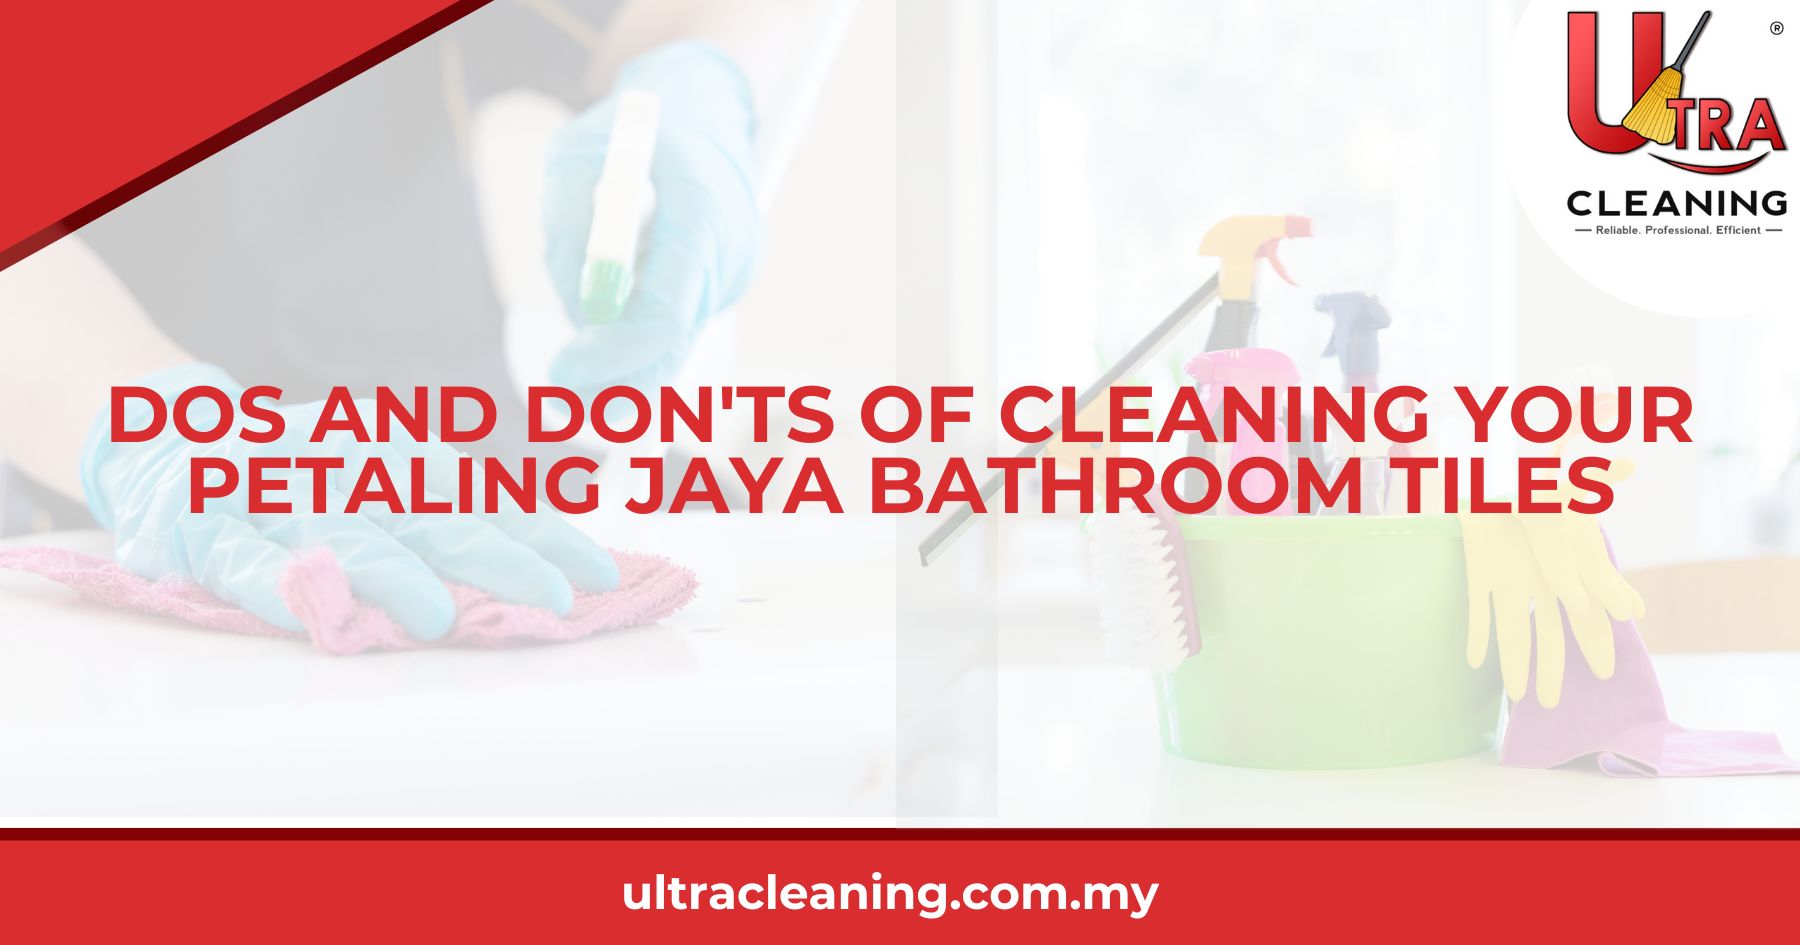 Dos and Don'ts of Cleaning Your Petaling Jaya Bathroom Tiles